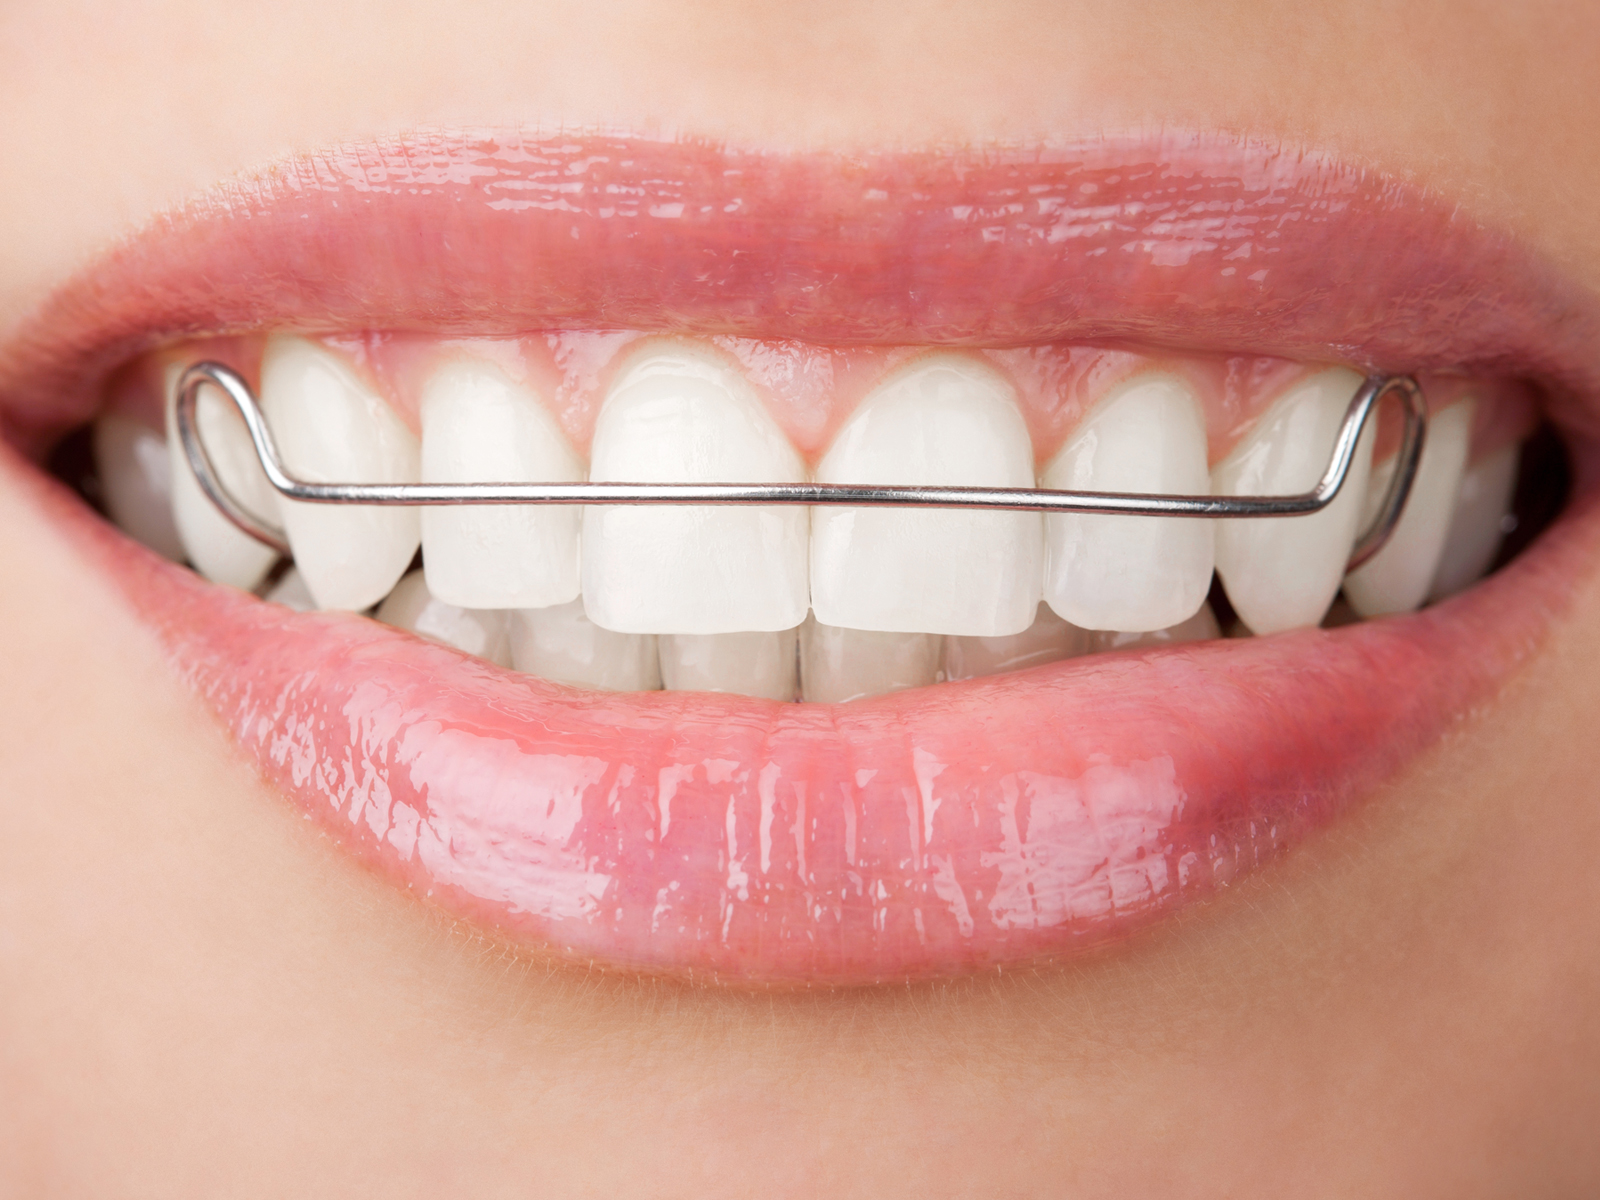 Can I wear my retainer without brushing?